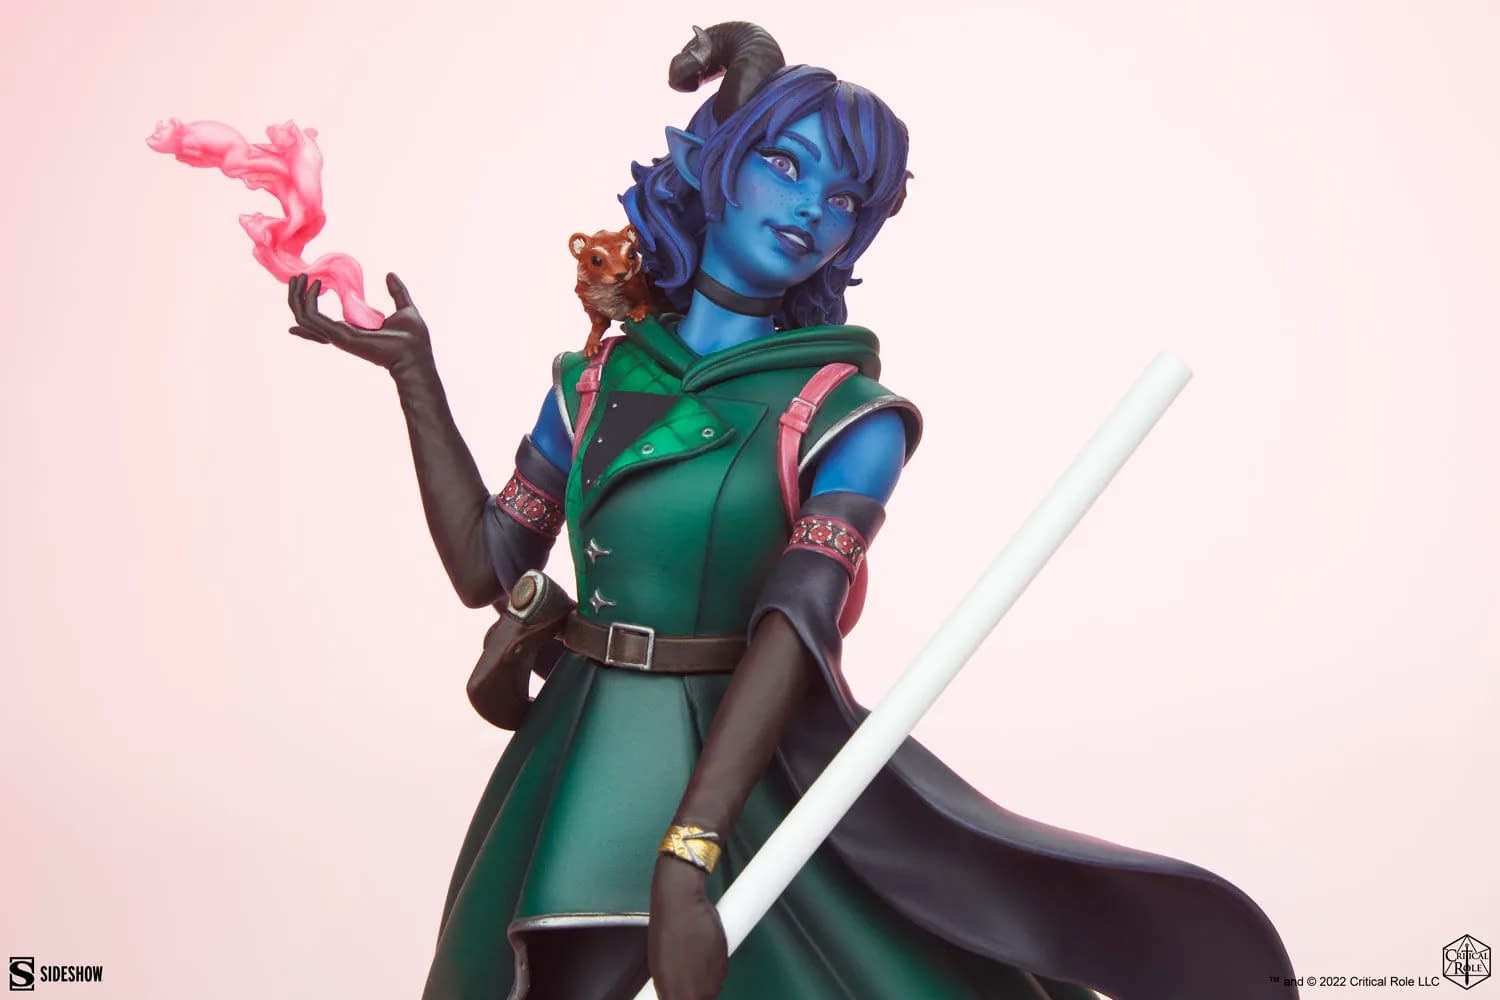 Critical Role Jester Mighty Nein Statue Revealed by Sideshow 